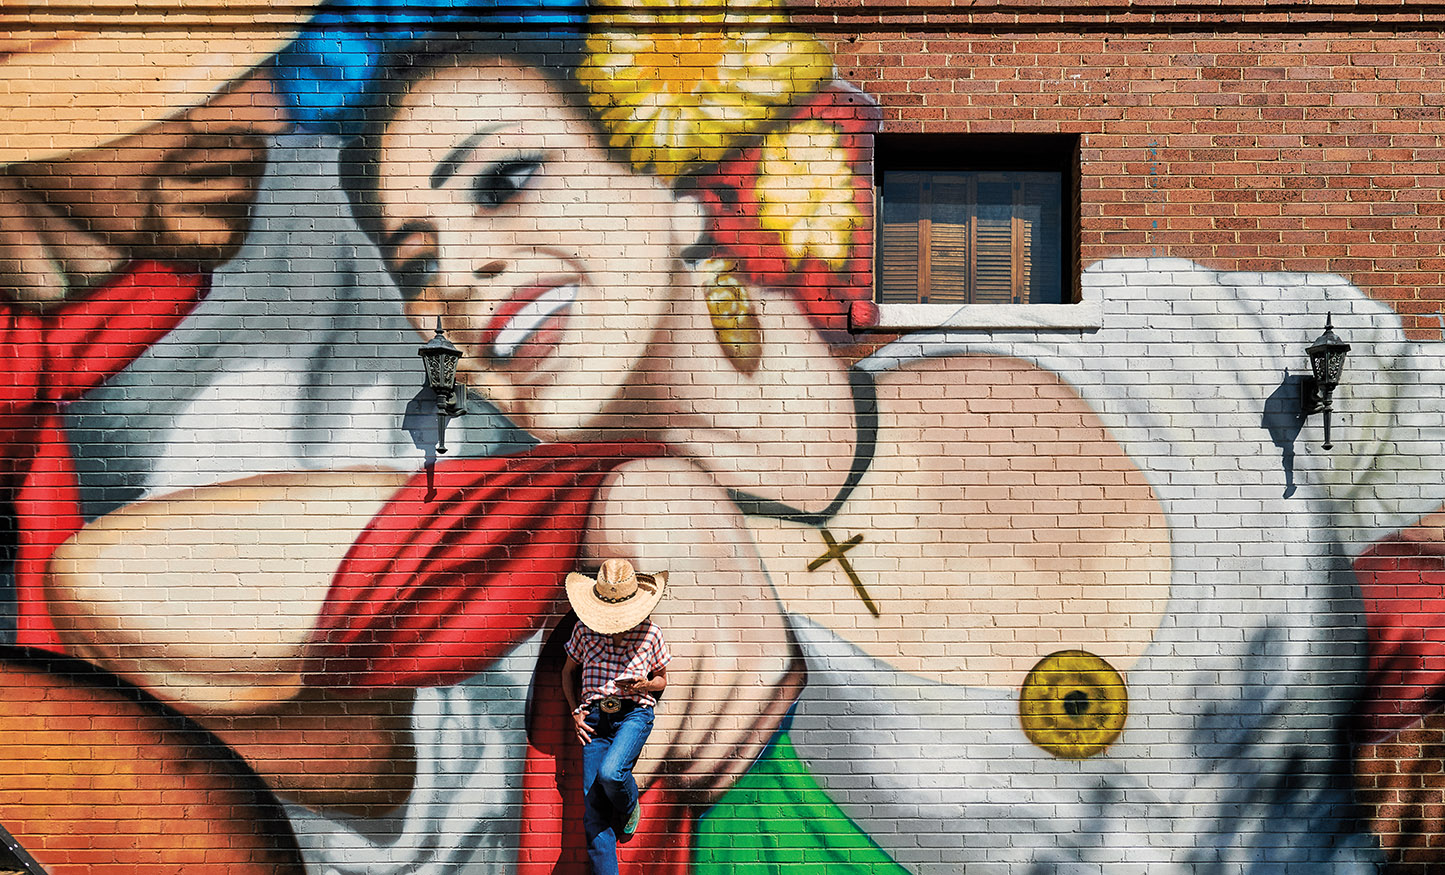 A person in a cowboy hat leans with their head down and back against a large colorful mural depicting a dancing woman